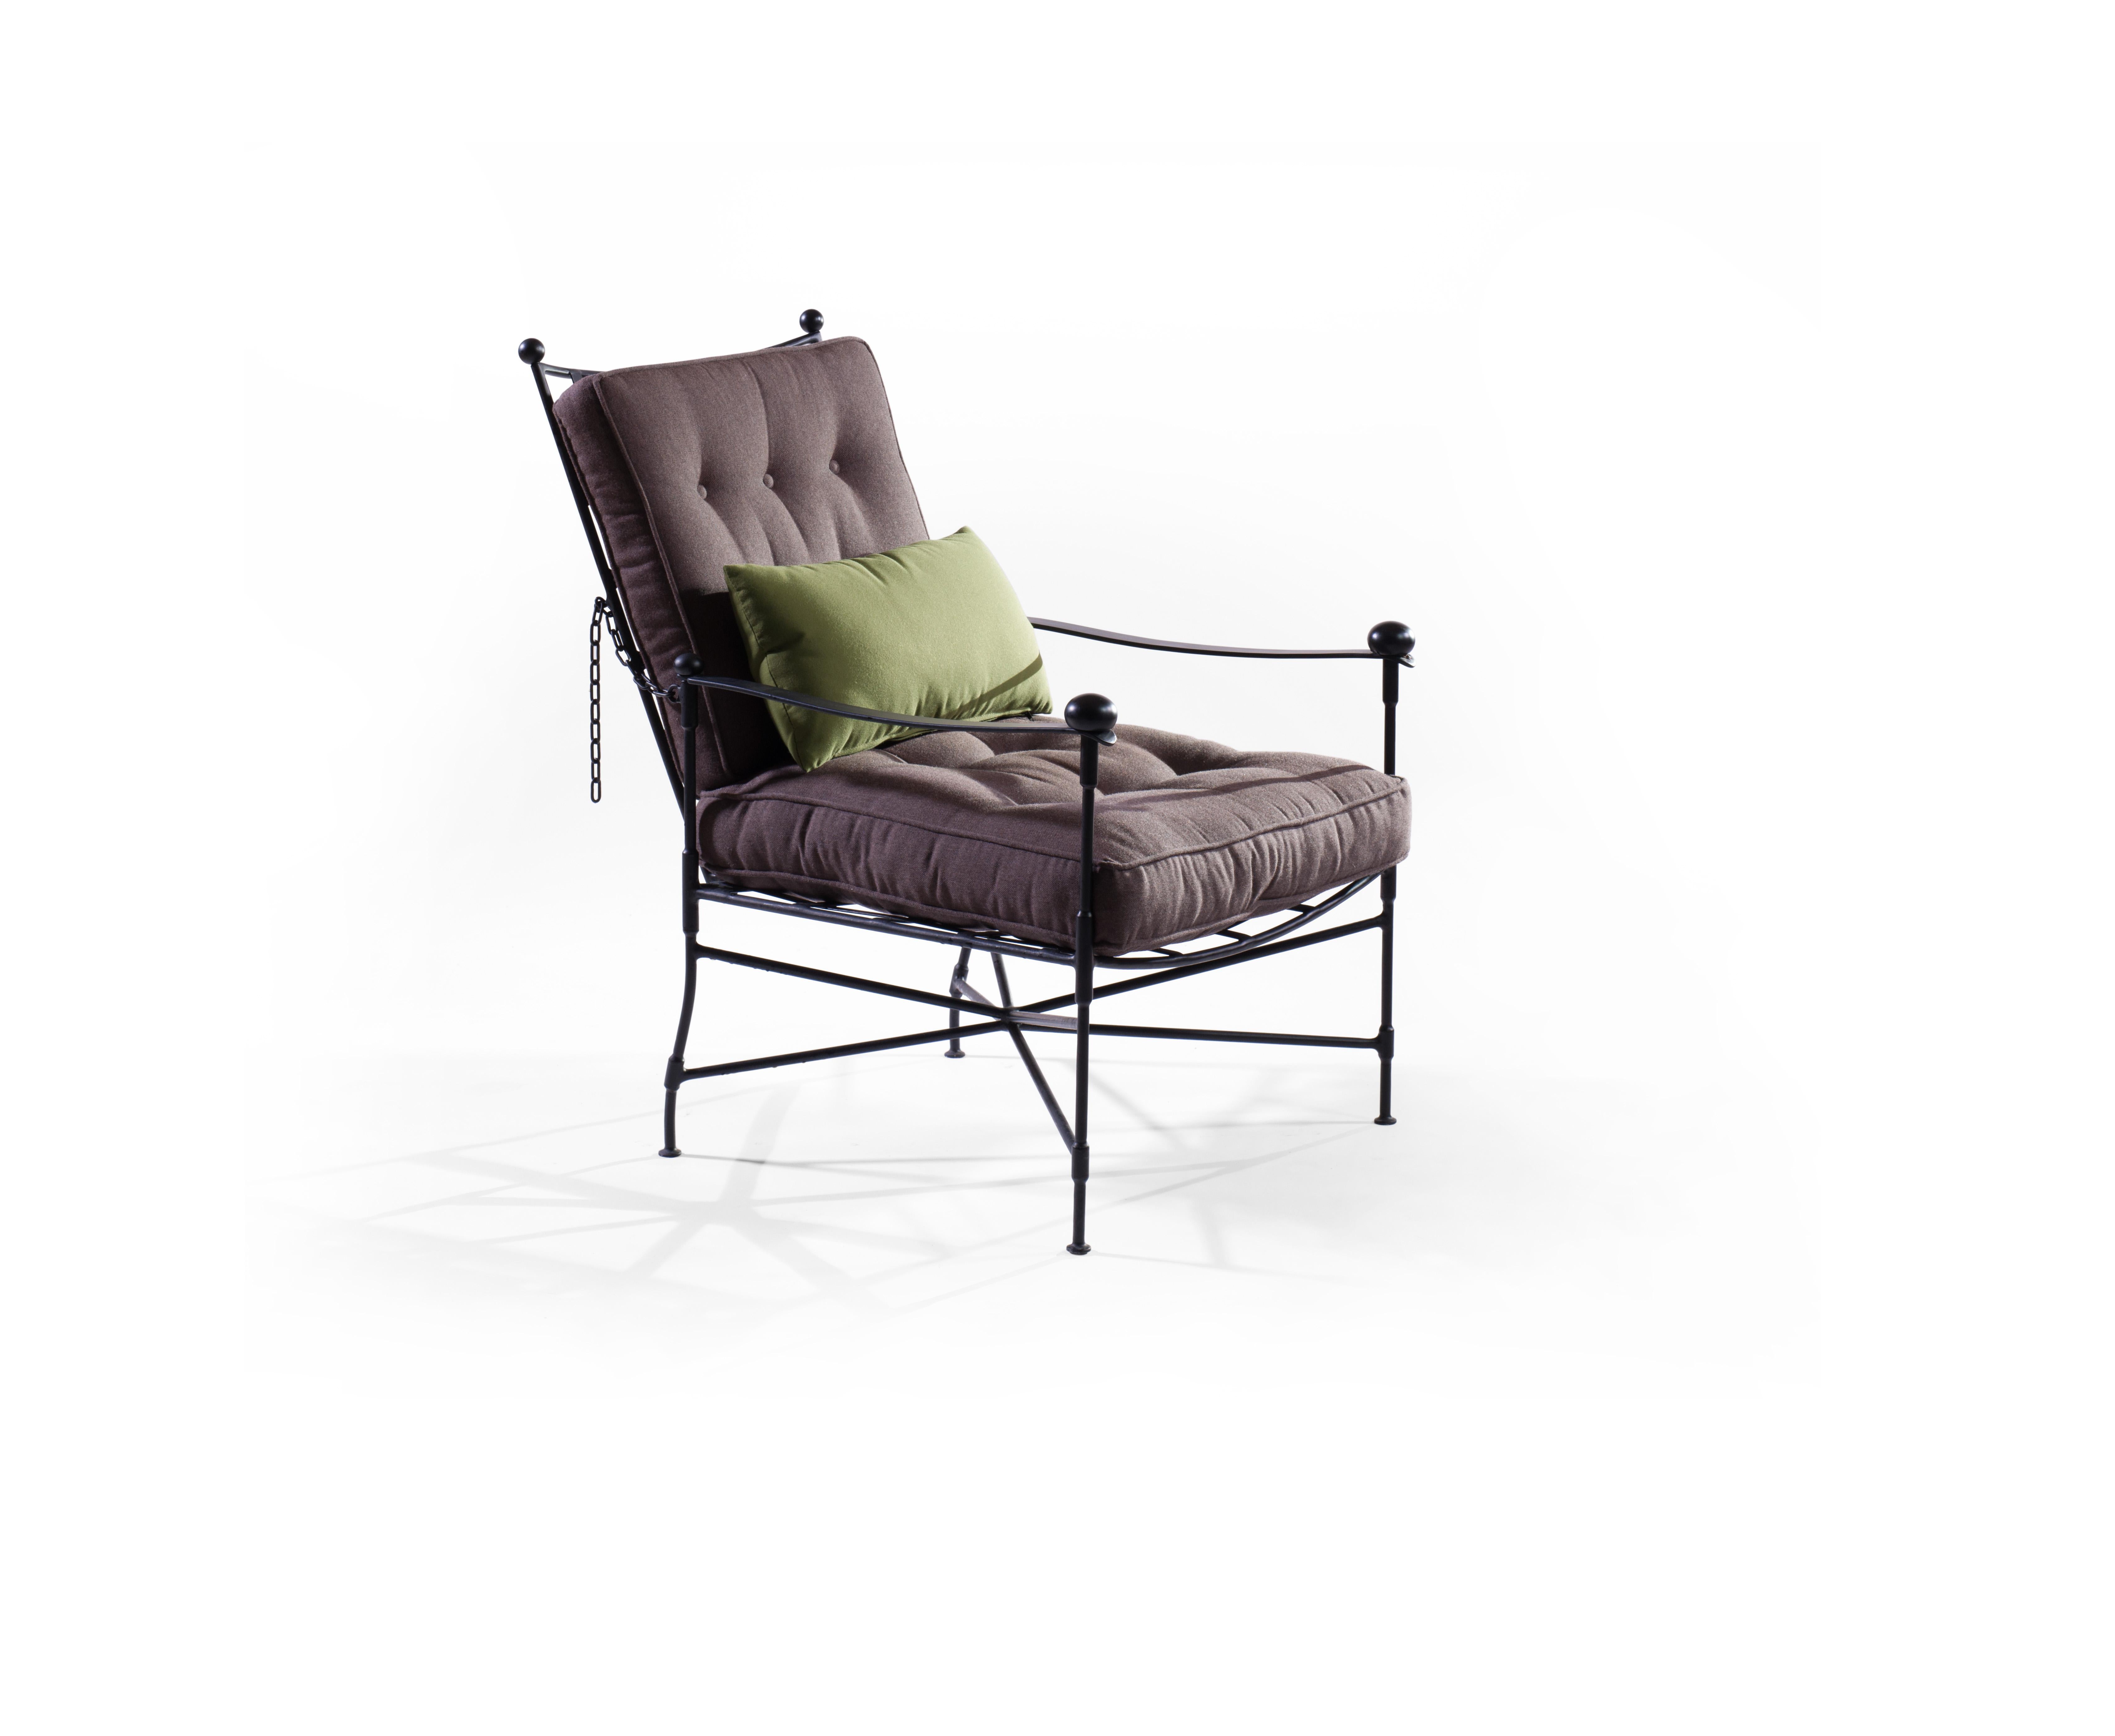 A Classic steel frame chair with generously crafted buttoned cushions for outside use
B.B. - We make this Iconic 18th century design because it simply sits so well in any exterior space or garden room.